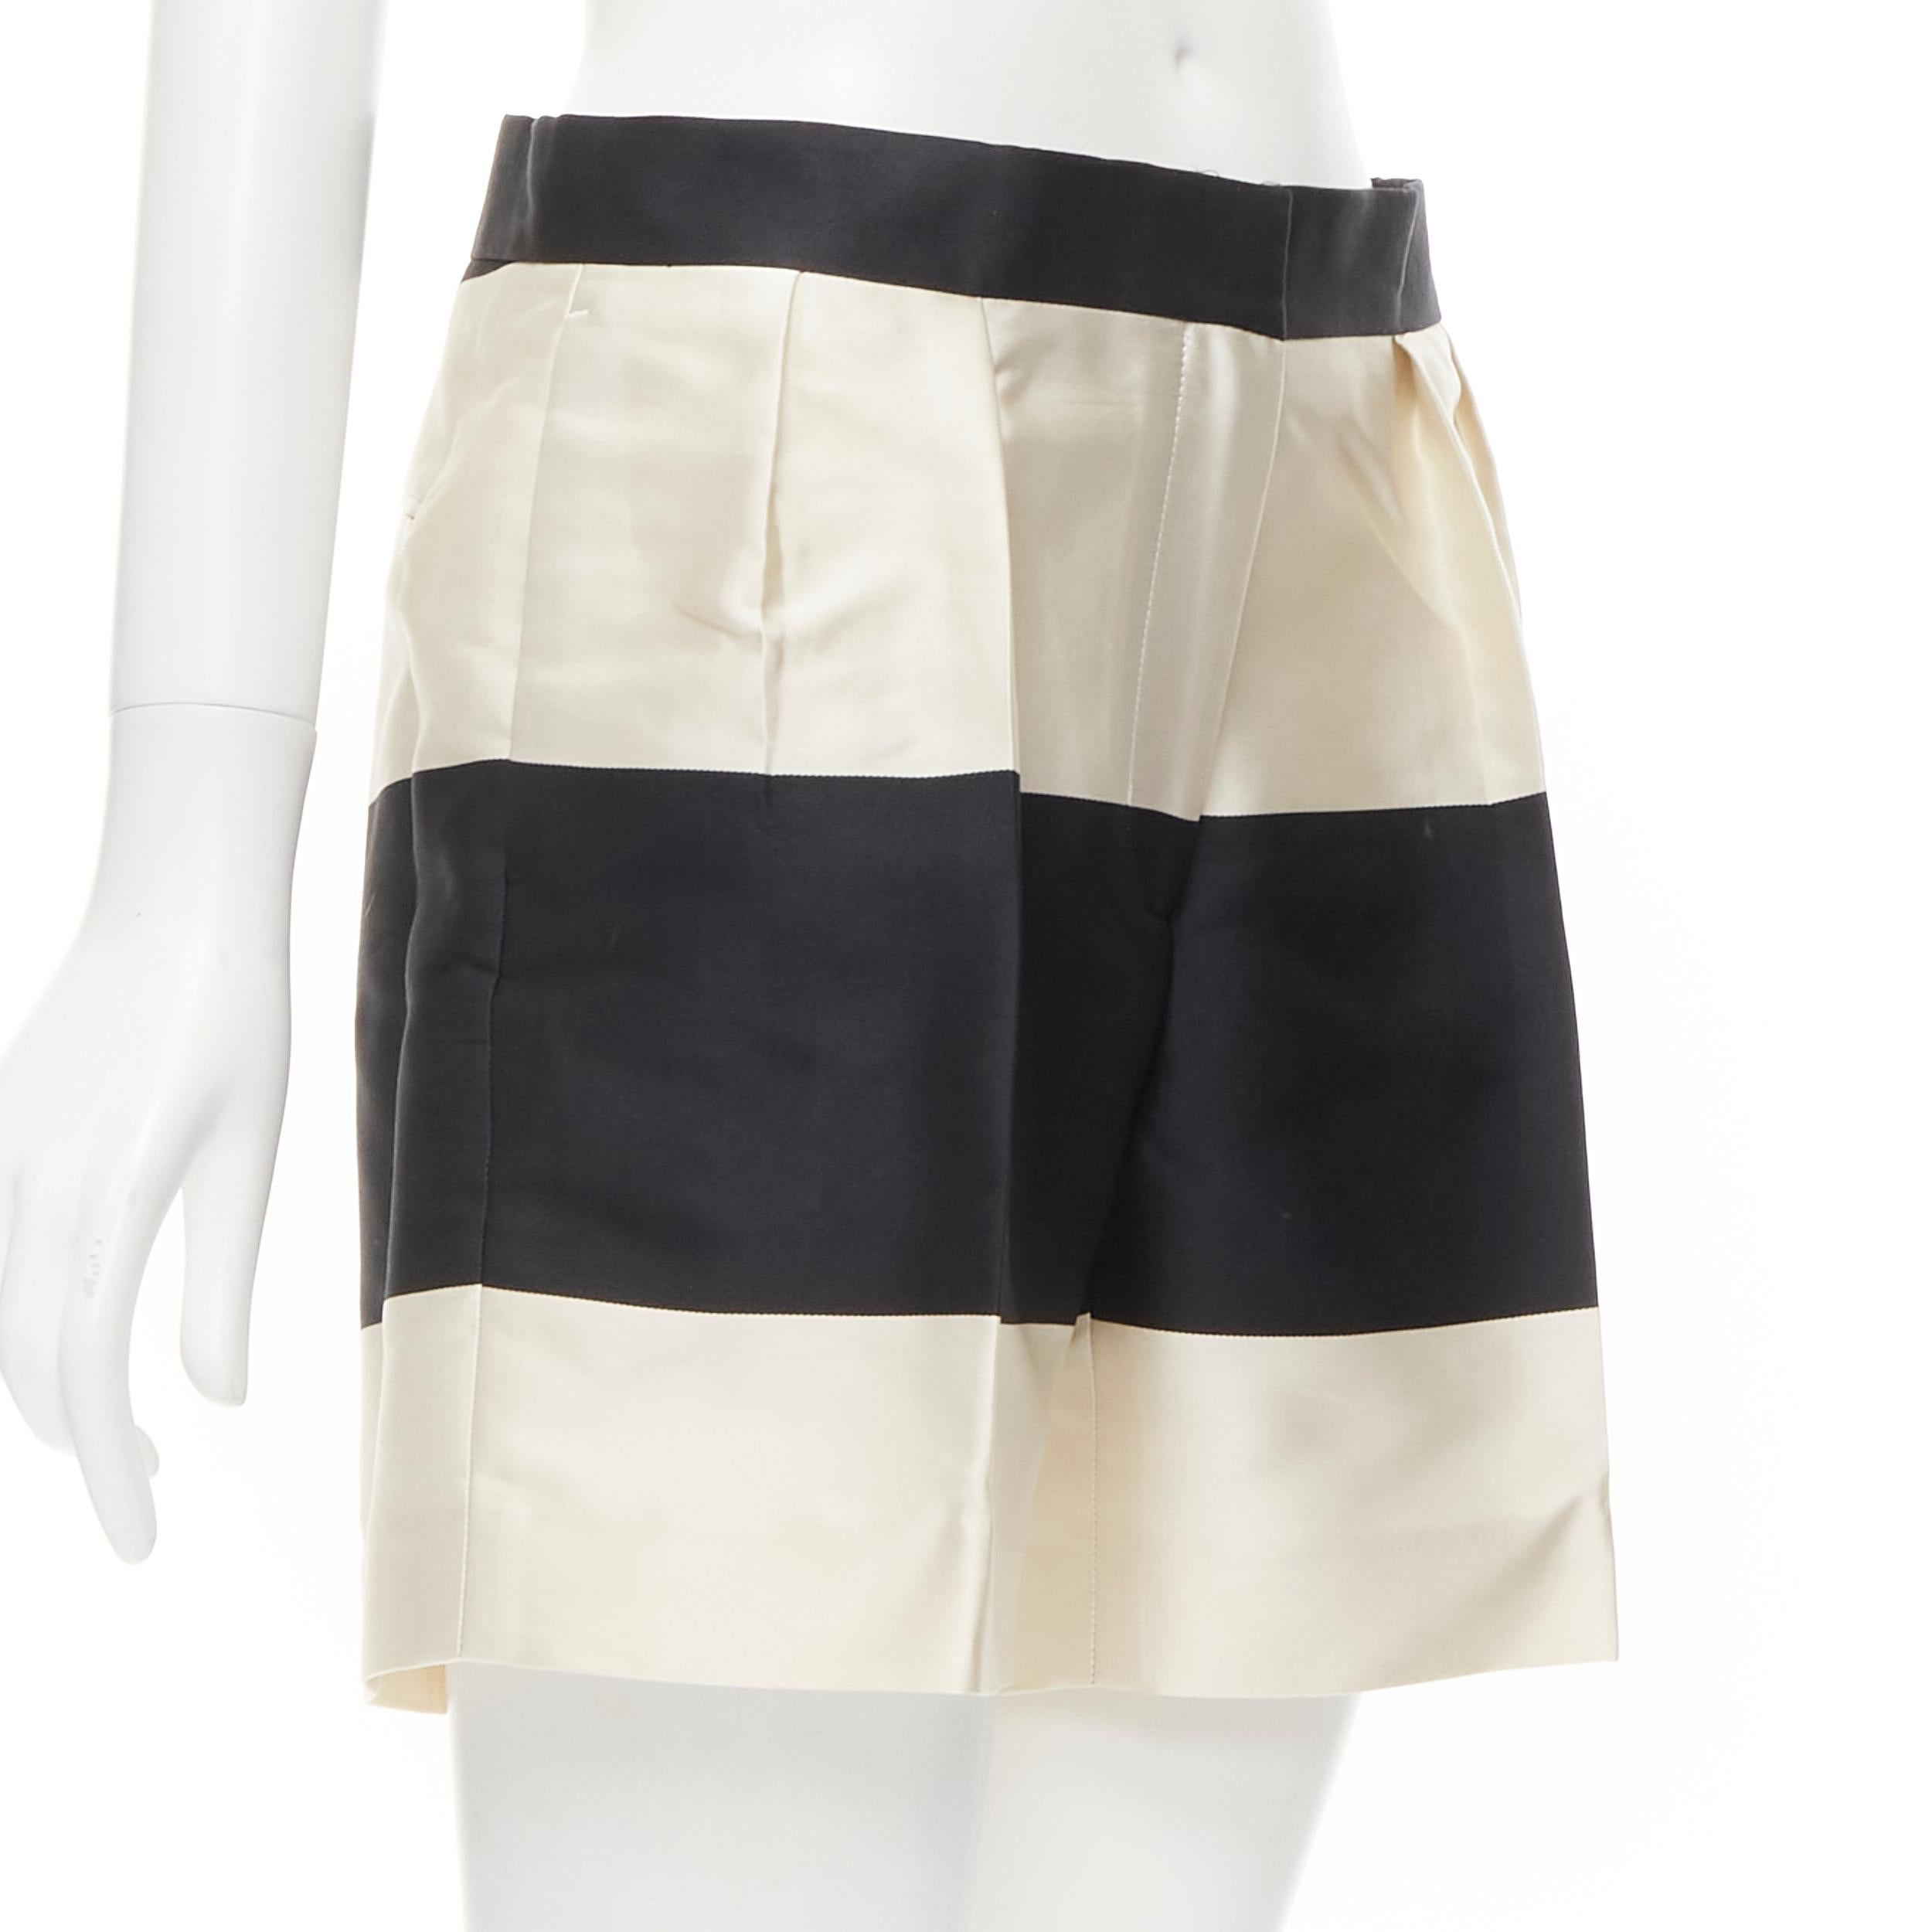 DRIES VAN NOTEN black white polyester silk striped pleat front shorts FR36 S 
Reference: MELK/A00034 
Brand: Dries Van Noten 
Material: Polyester 
Color: Black 
Pattern: Striped 
Closure: Zip 
Extra Detail: 3-pocket design. 
Made in: Morocco